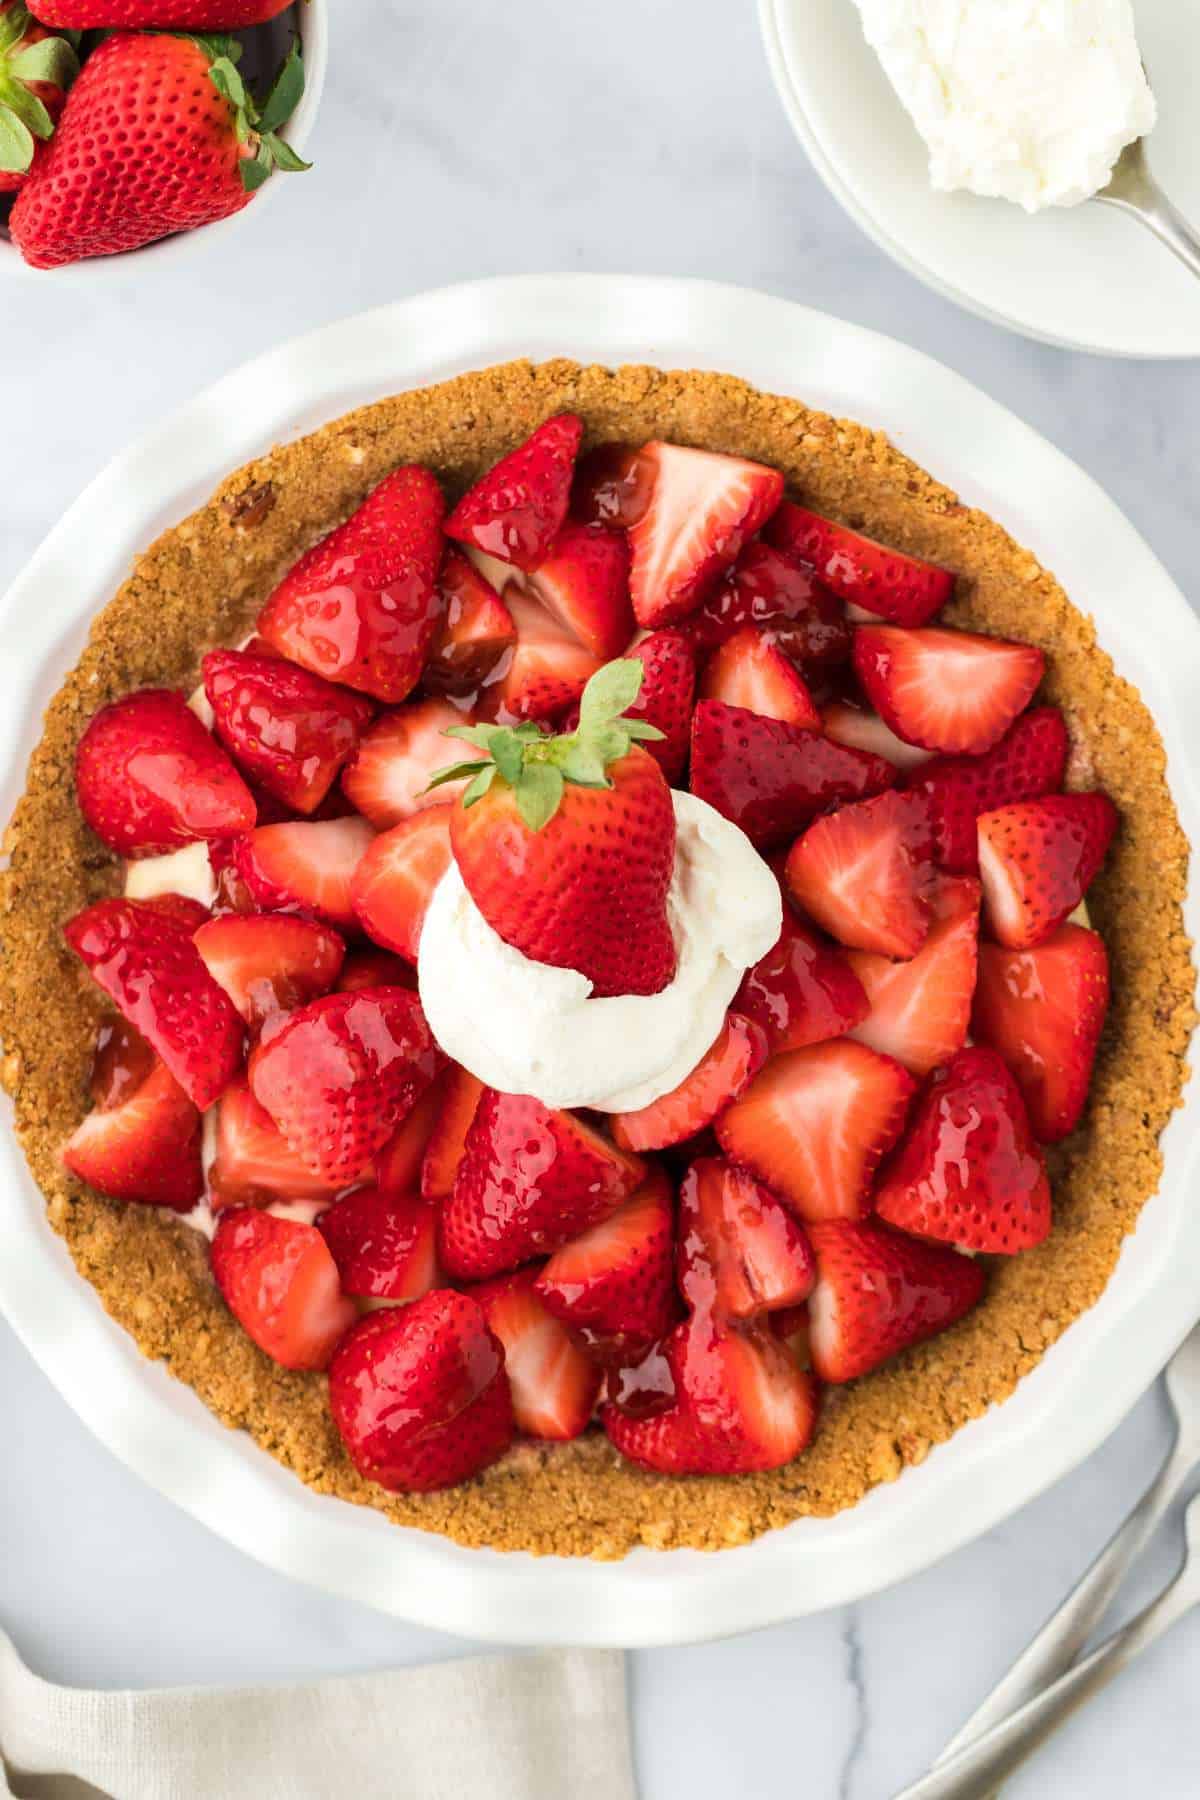 A strawberry custard pie topped with fresh whole strawberries and whipped cream